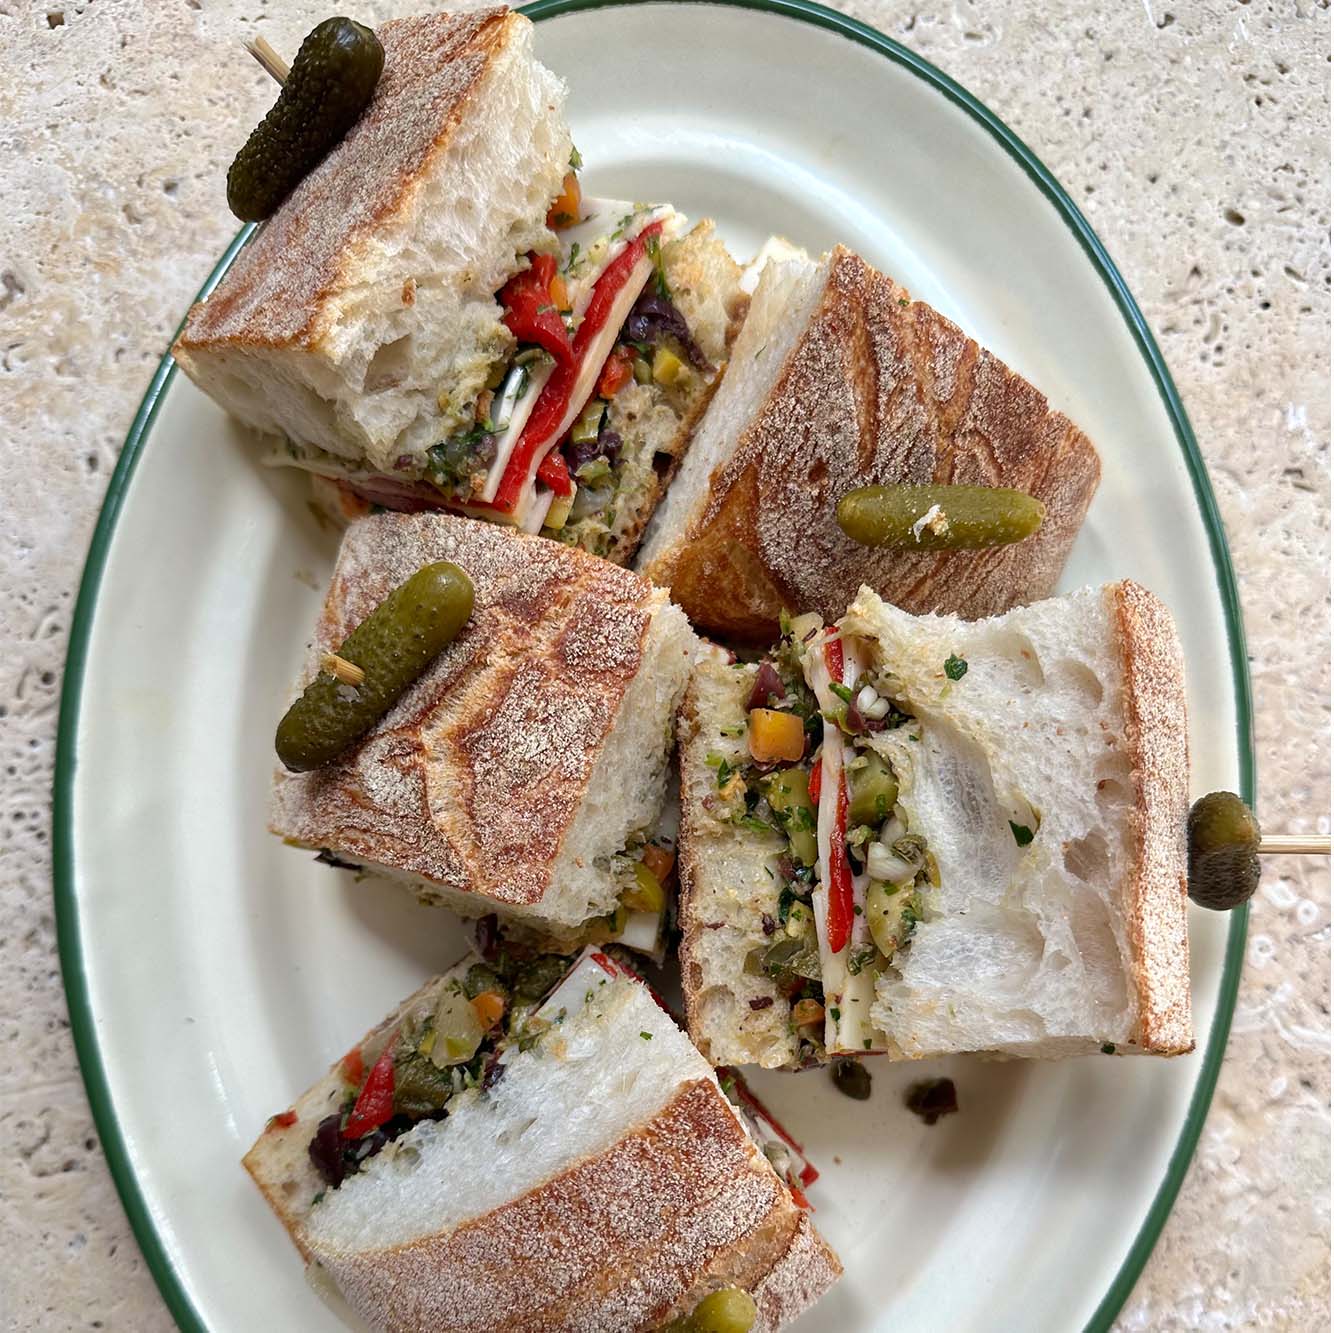 Muffaletta sandwich with provolone & marinated peppers